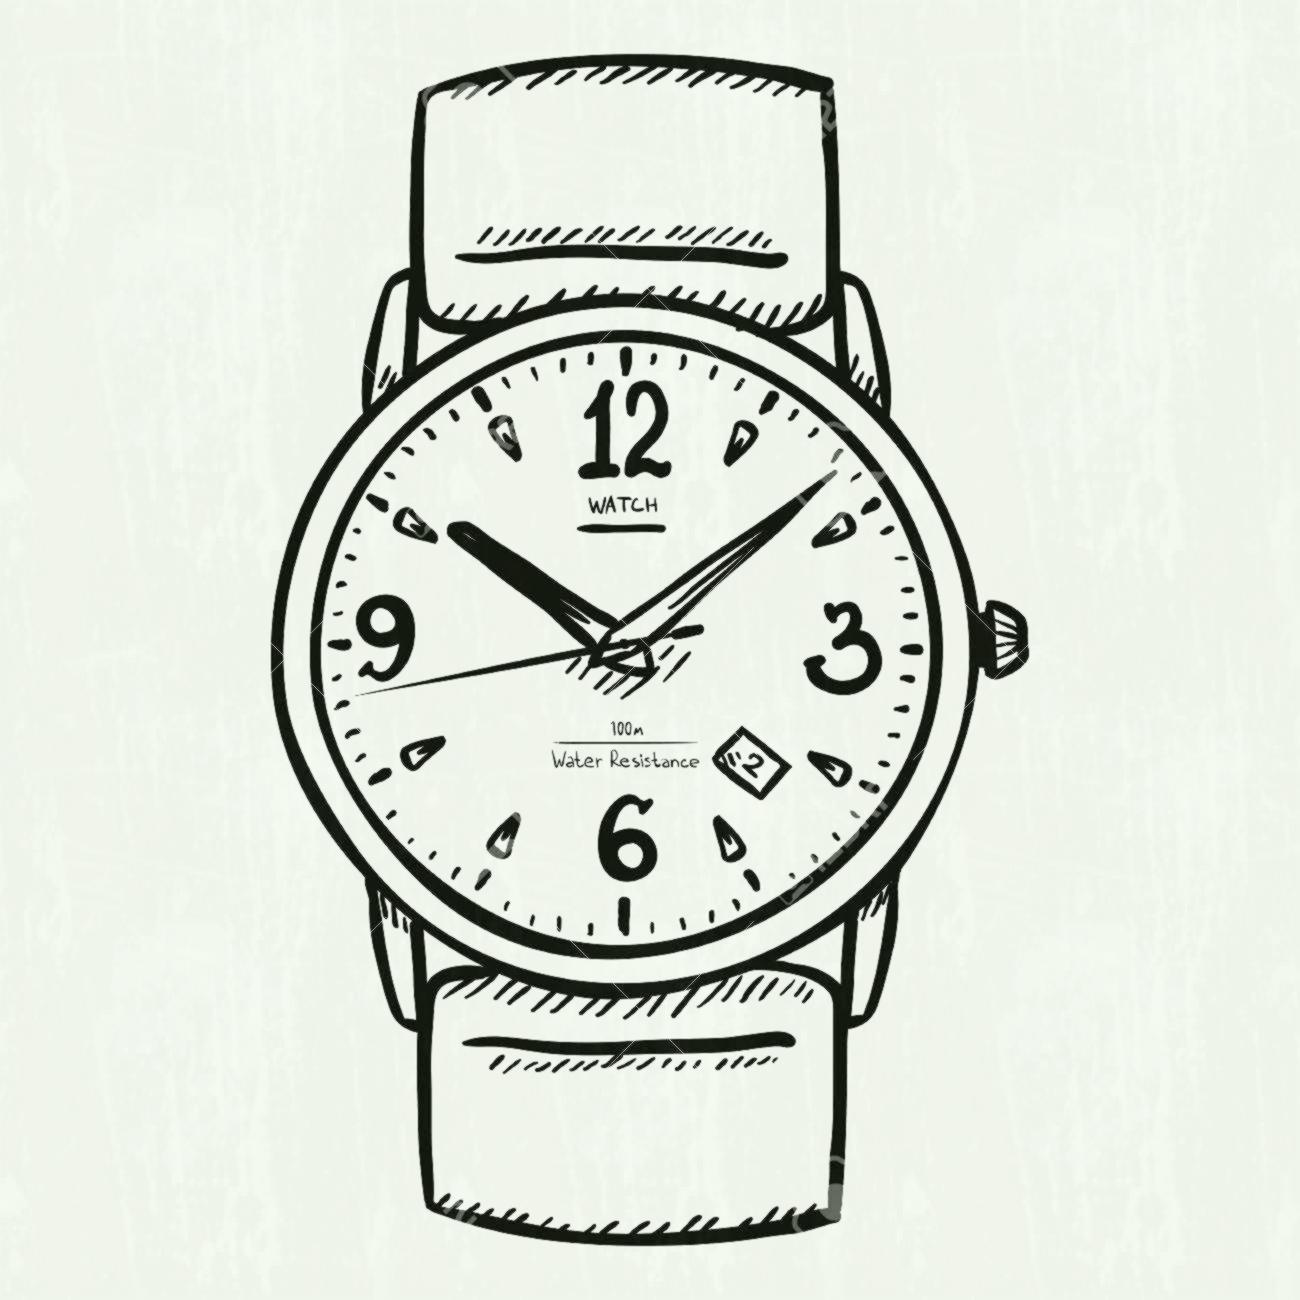 Wrist watch clipart black and white